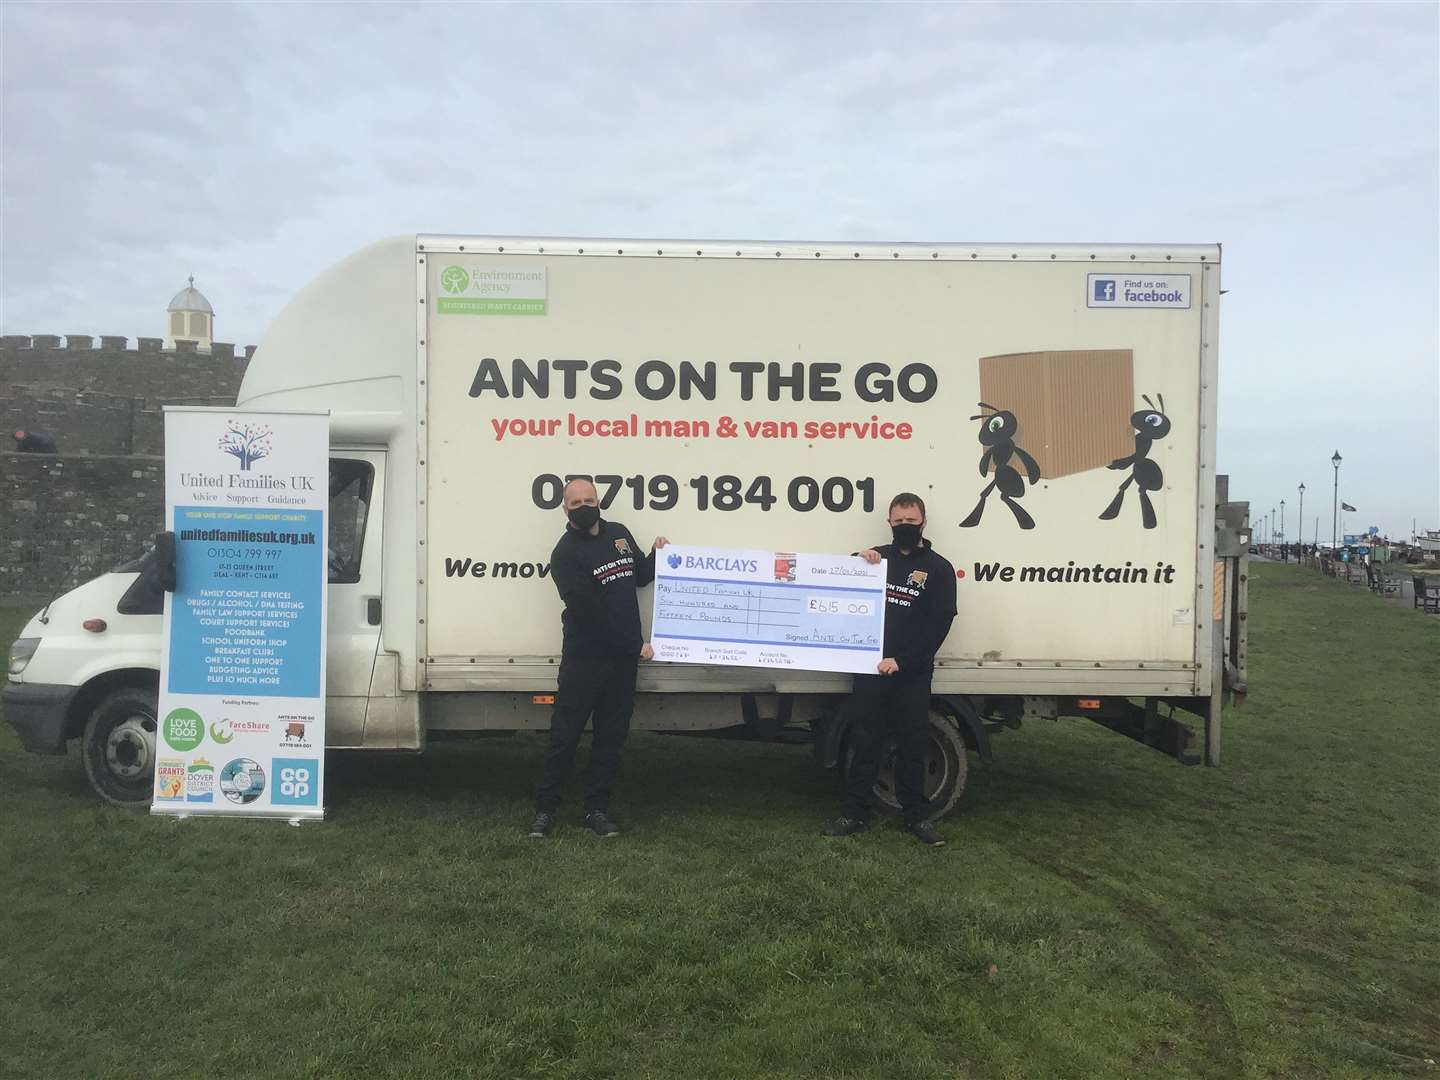 Ants on the Go is a business that helped United Families. It raised £615 in a Christmas tree collection service to help the charity's food bank